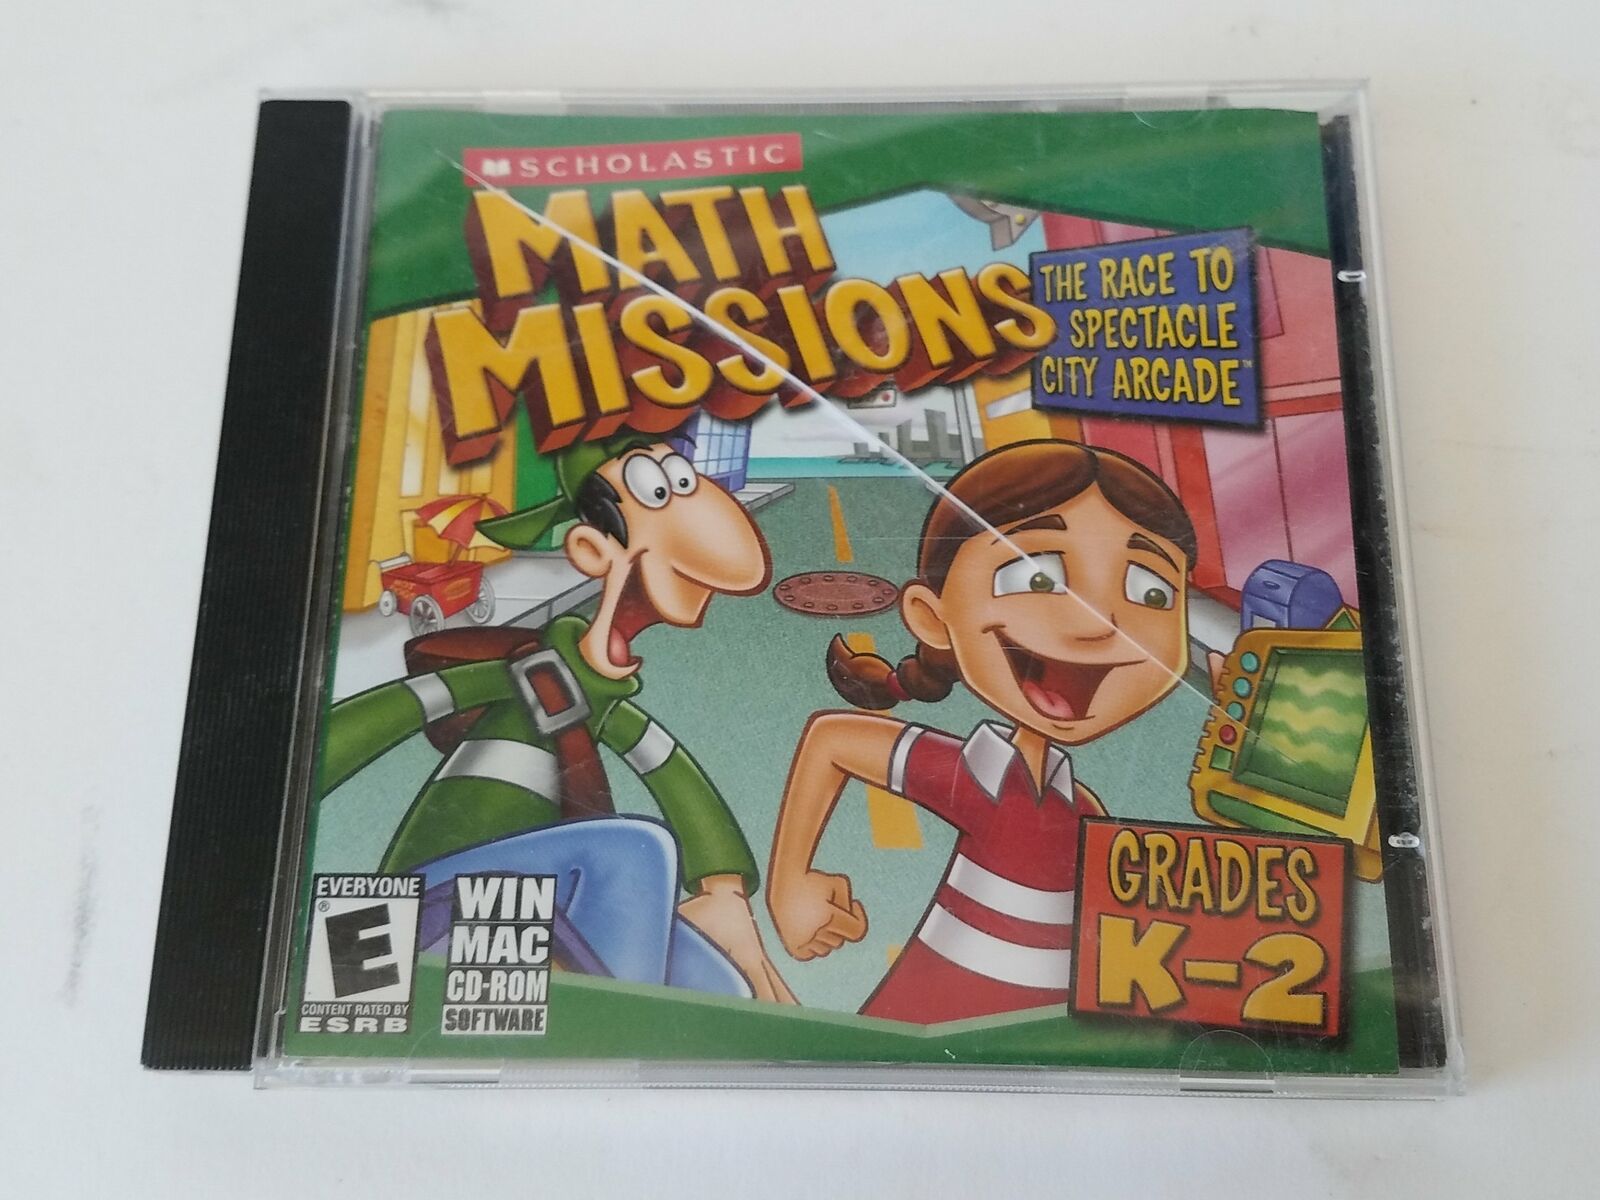 Scholastic Math Missions: The Race To Spectacle City Arcade Grades K-2